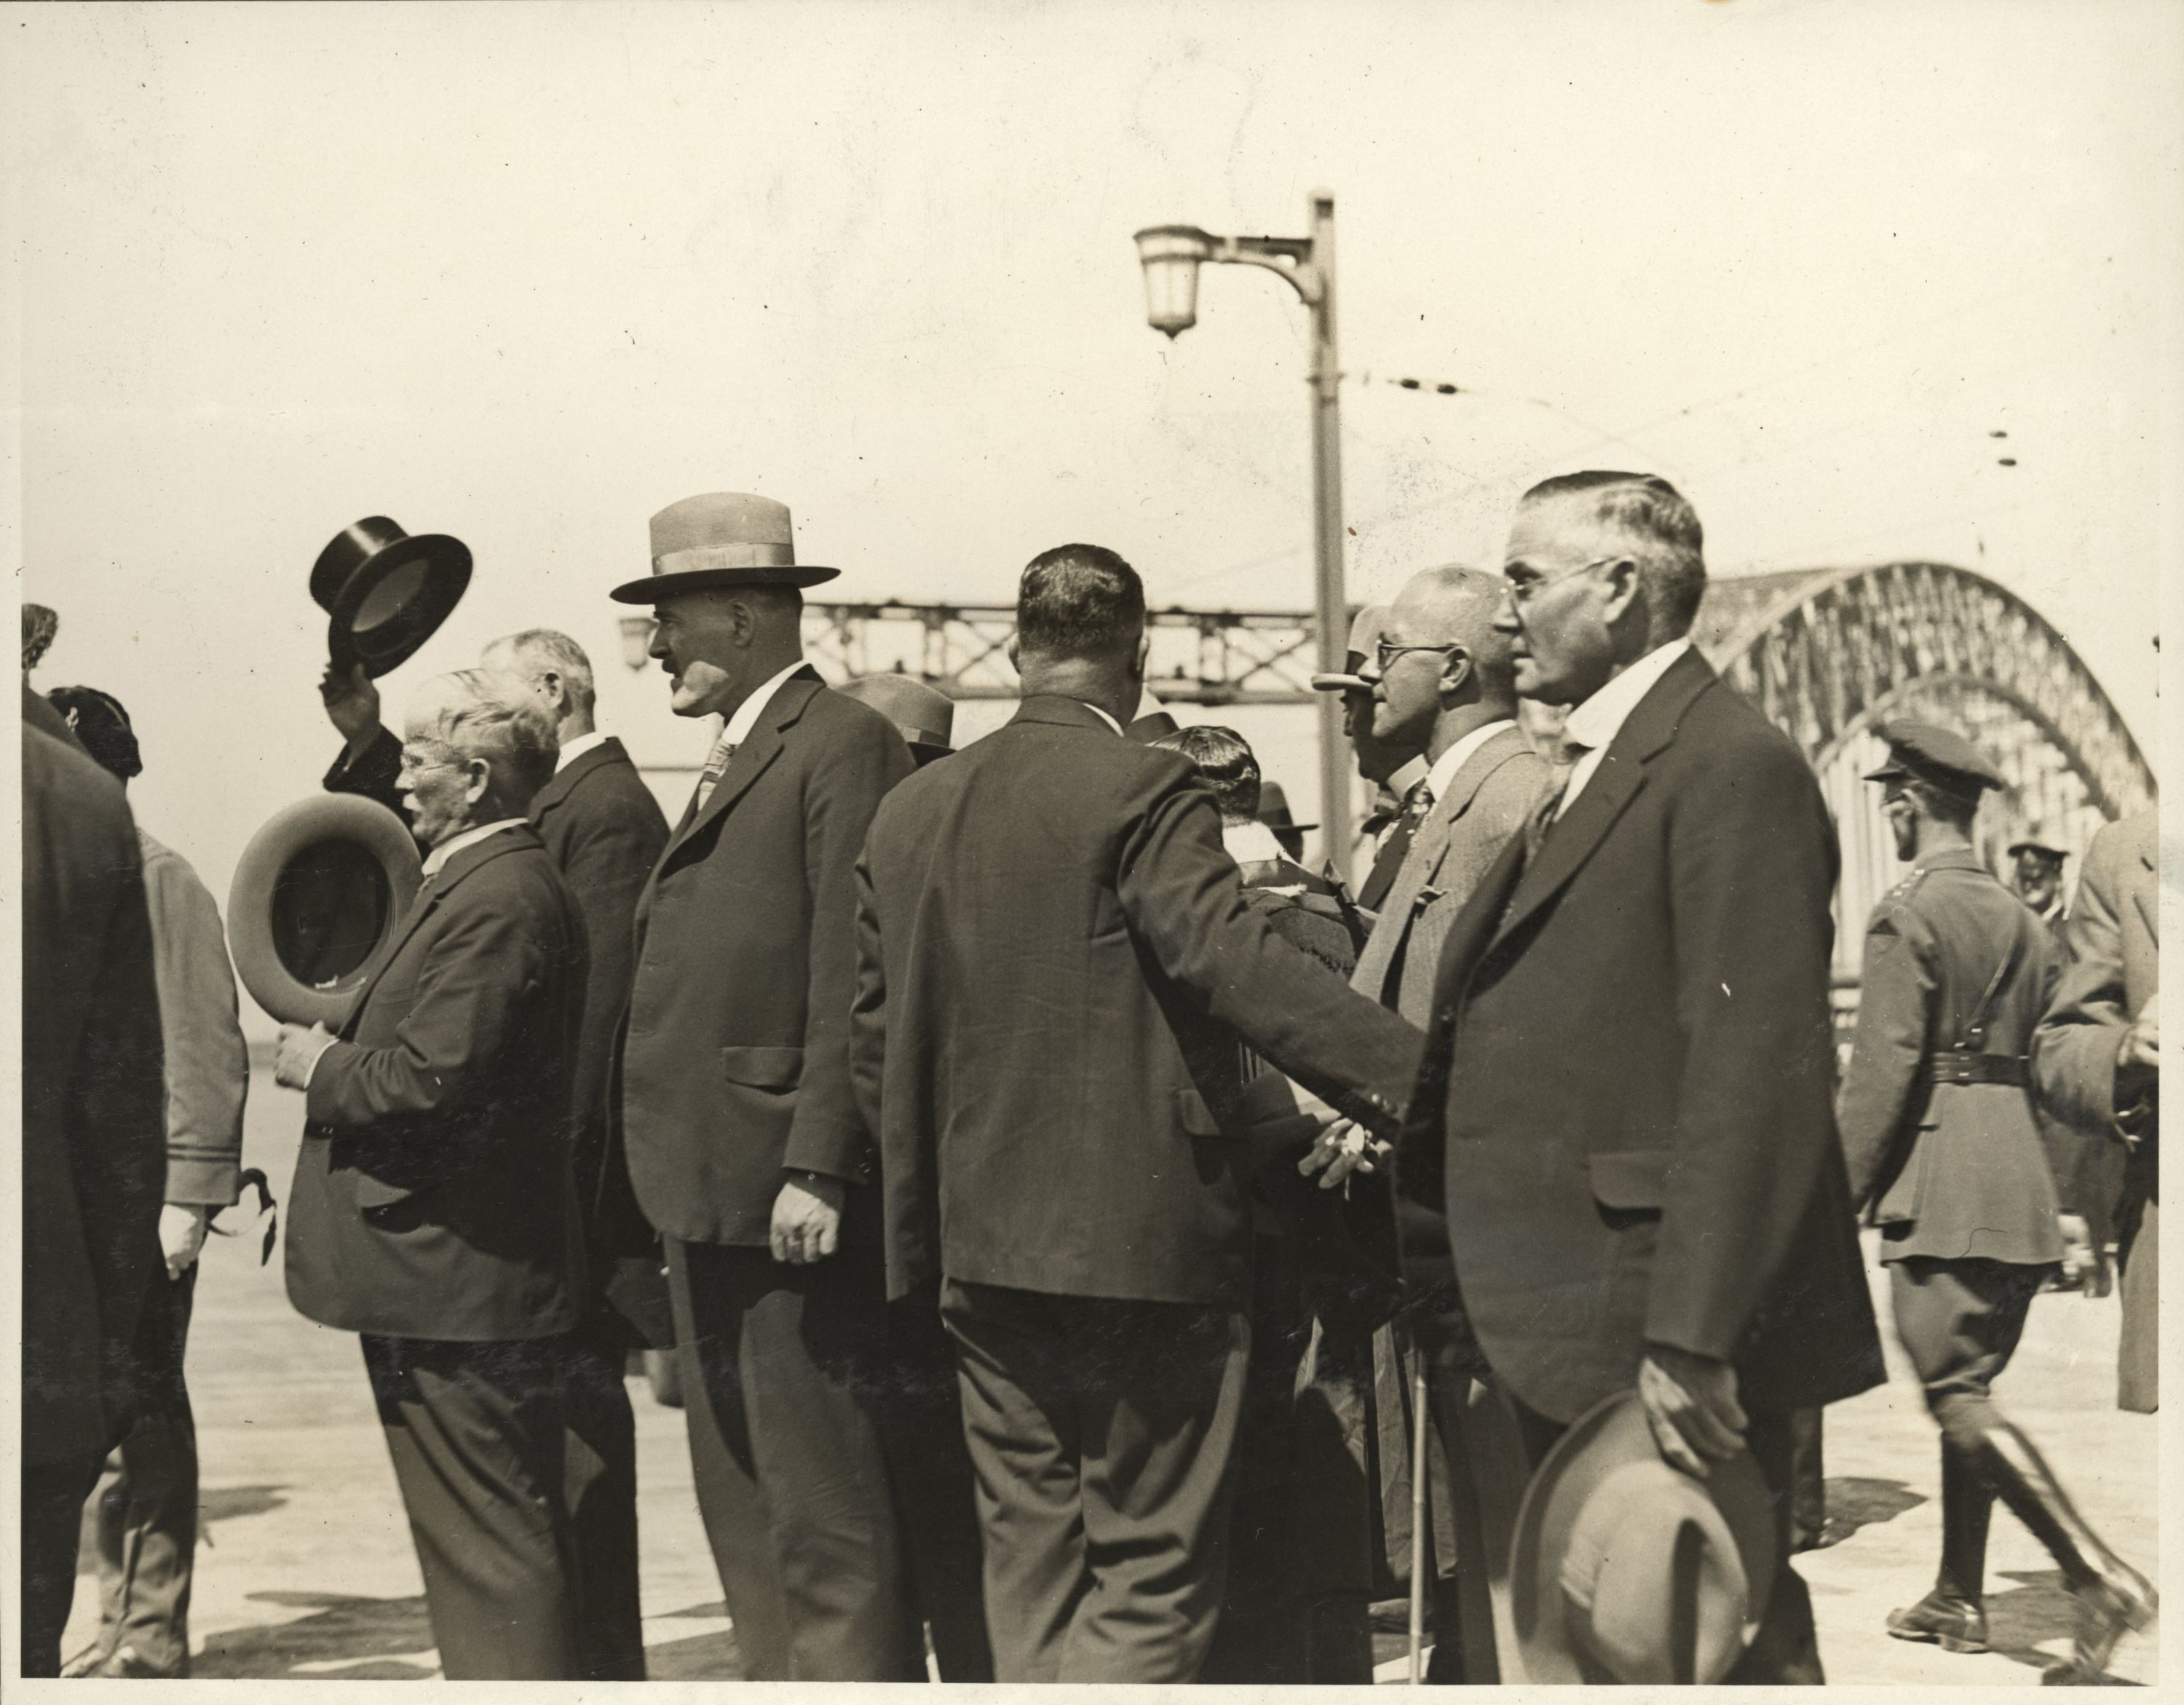 A group of men stand with the Sydney Harbour Bridge in the background